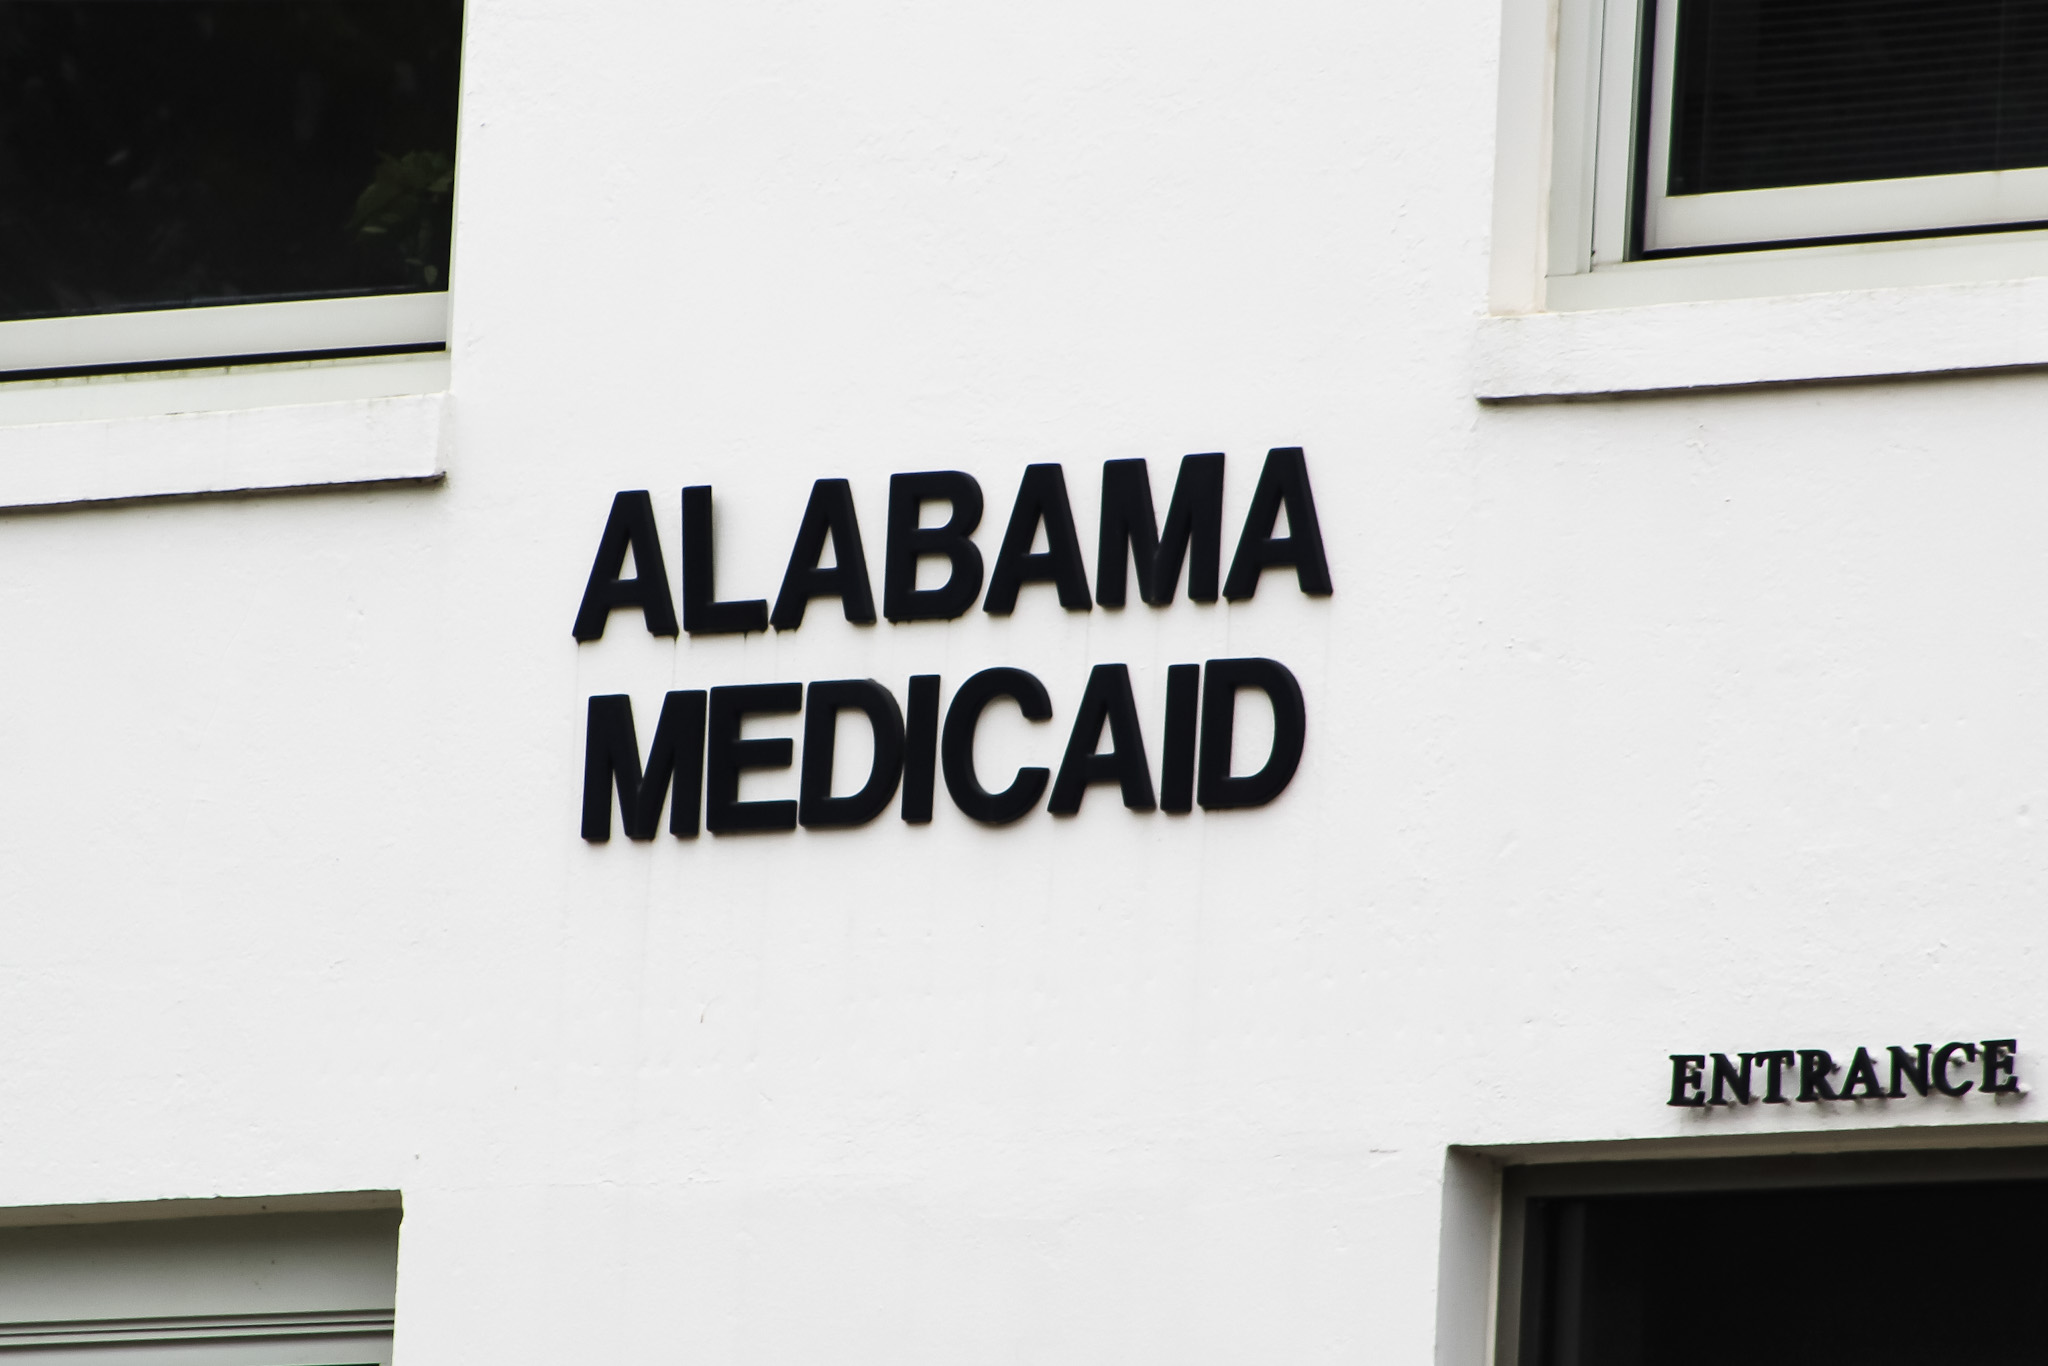 Alabama Lawmakers briefed on New Insurance Expansion Plan